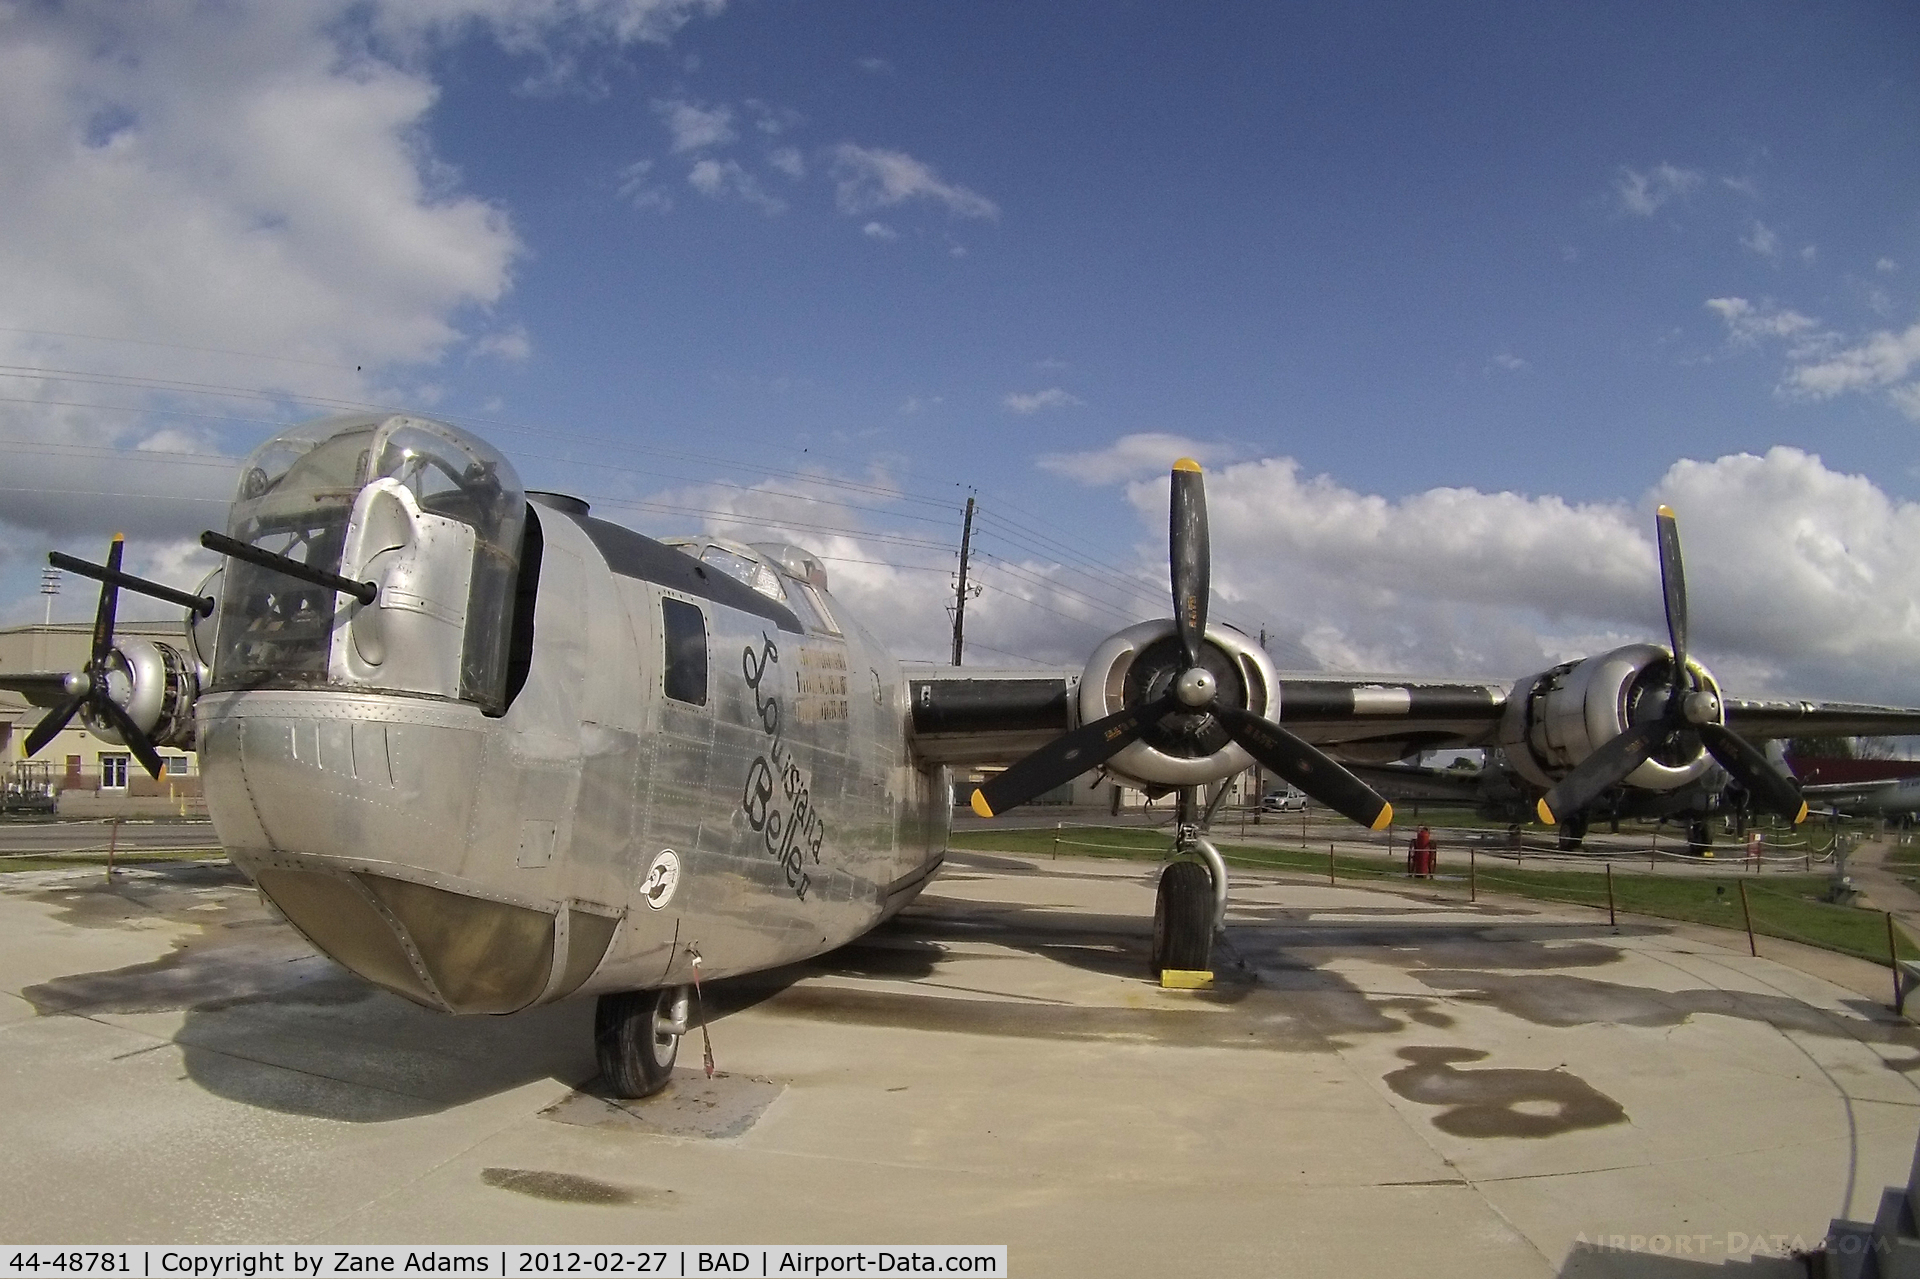 44-48781, 1944 Ford B-24J Liberator C/N 3636, At the 8th Air Force Museum - Barksdale AFB